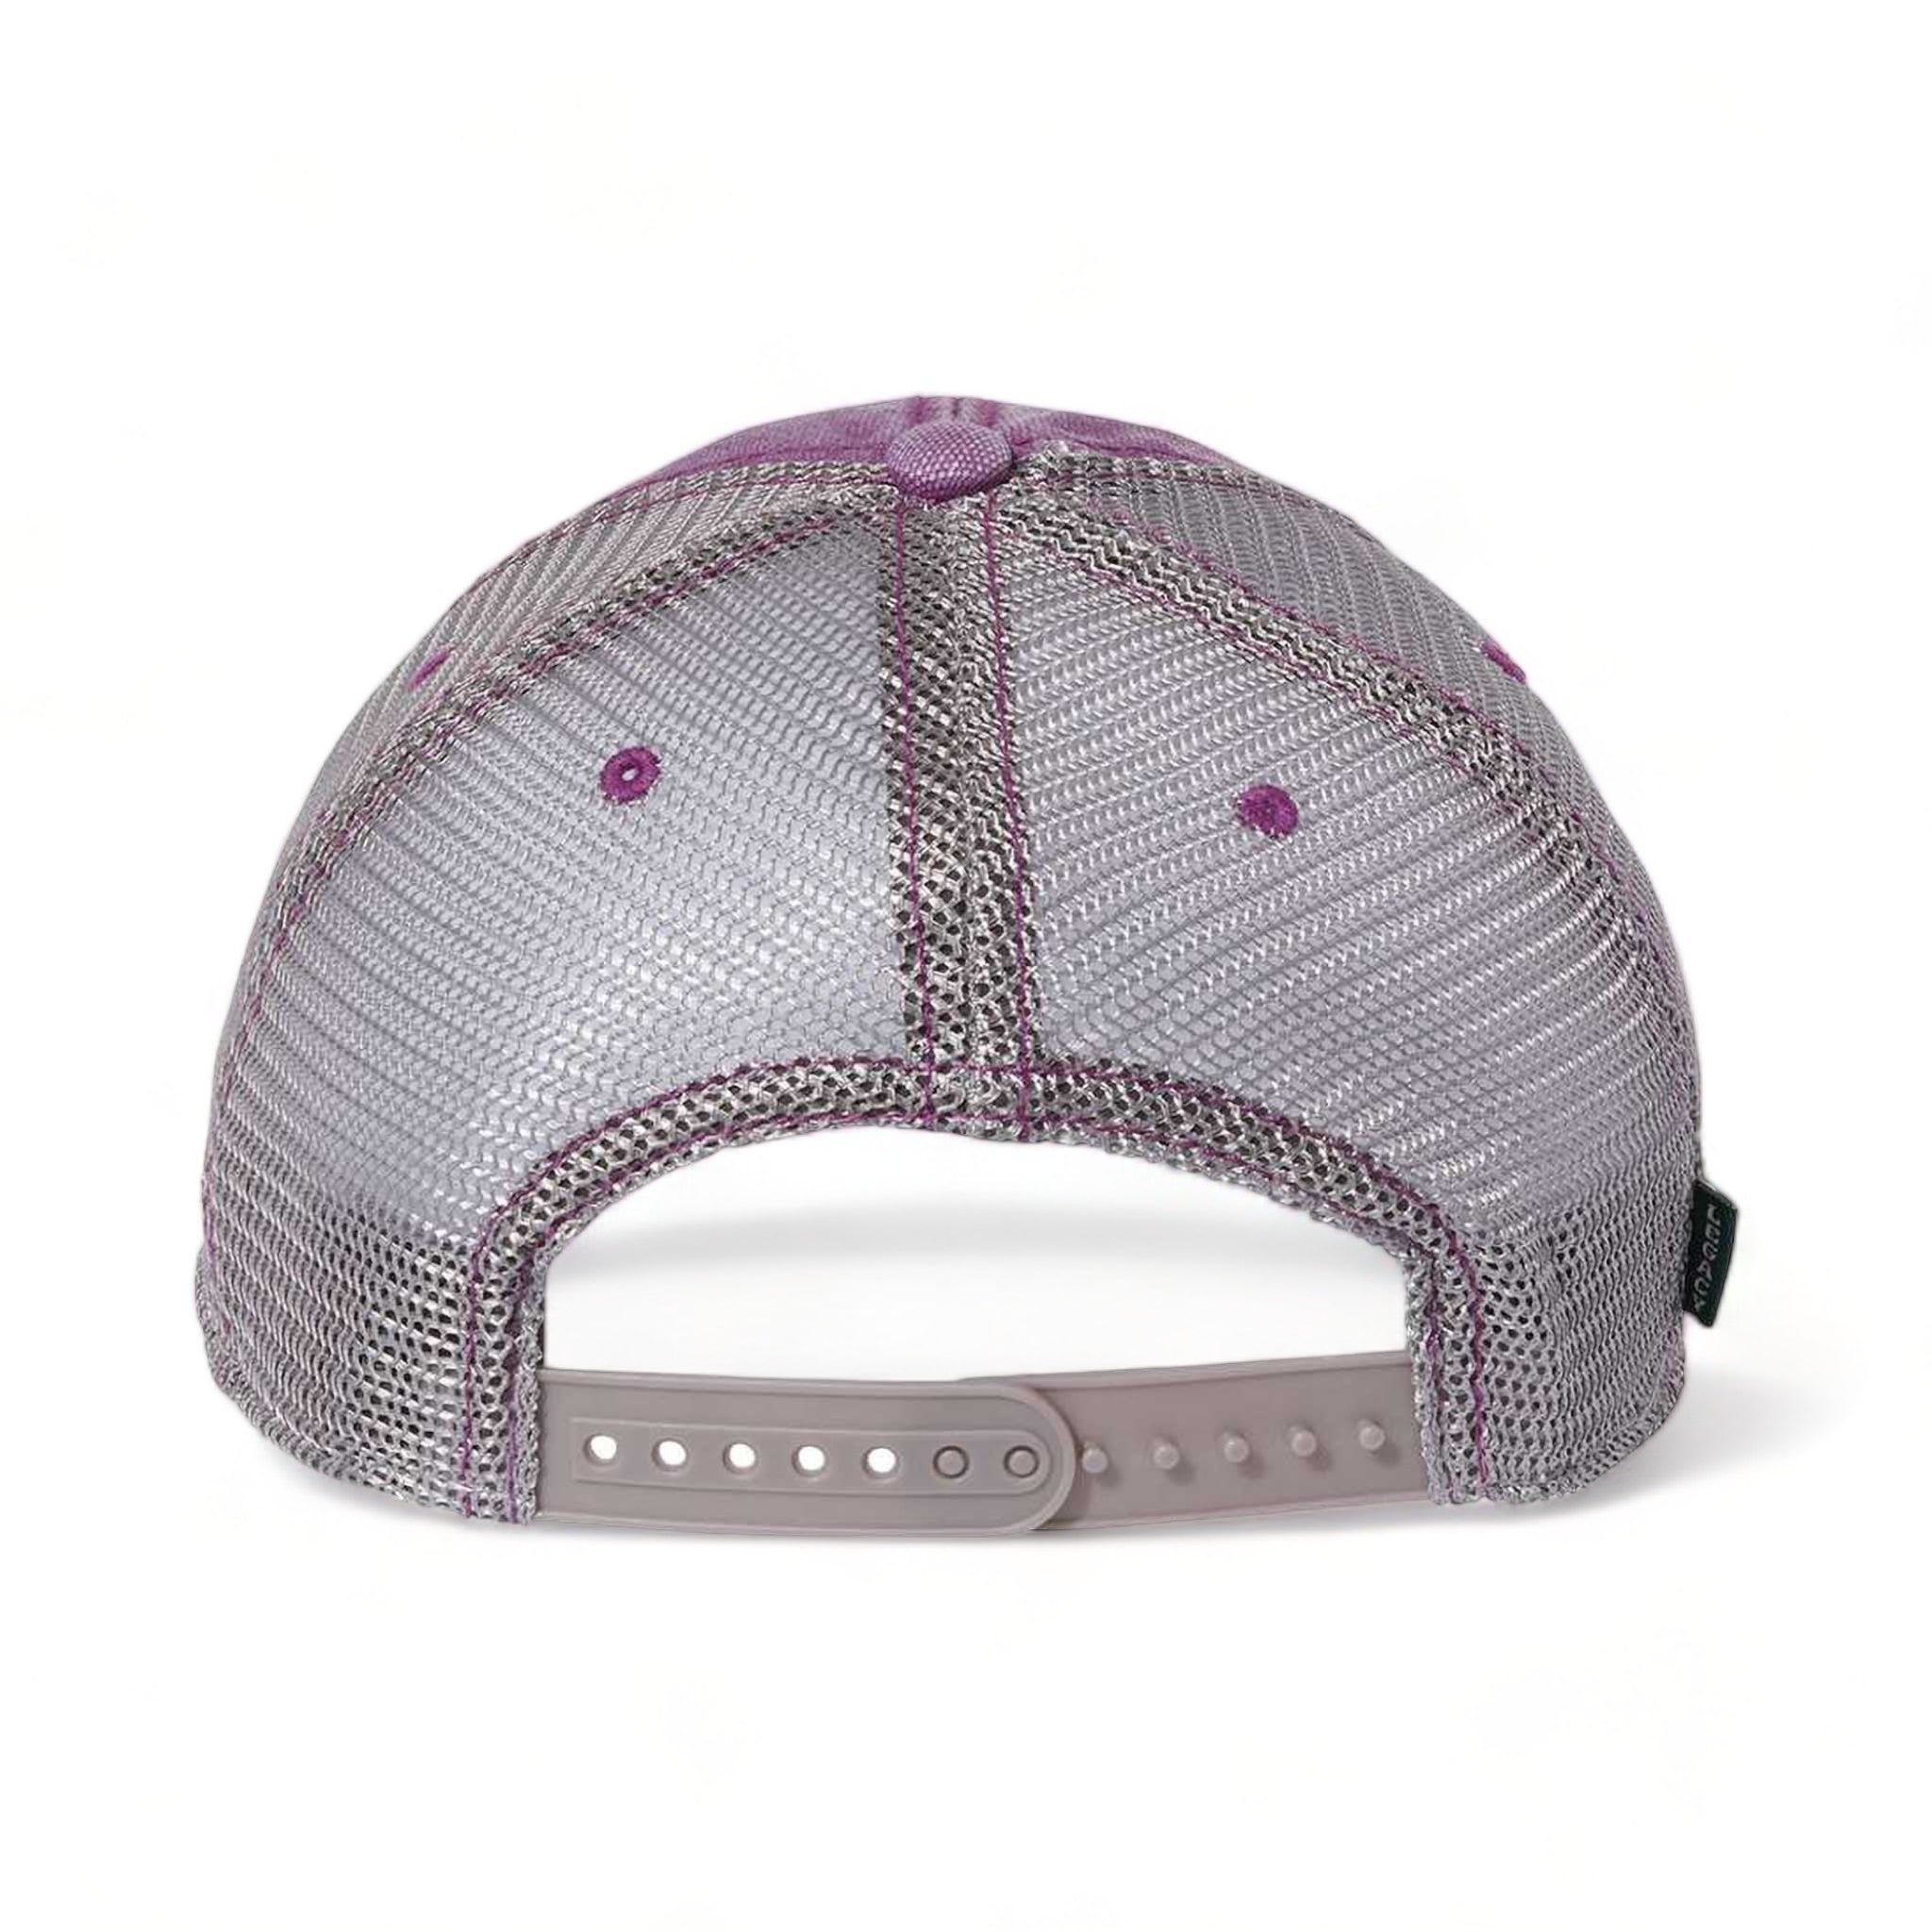 Back view of LEGACY DTA custom hat in orchid and grey